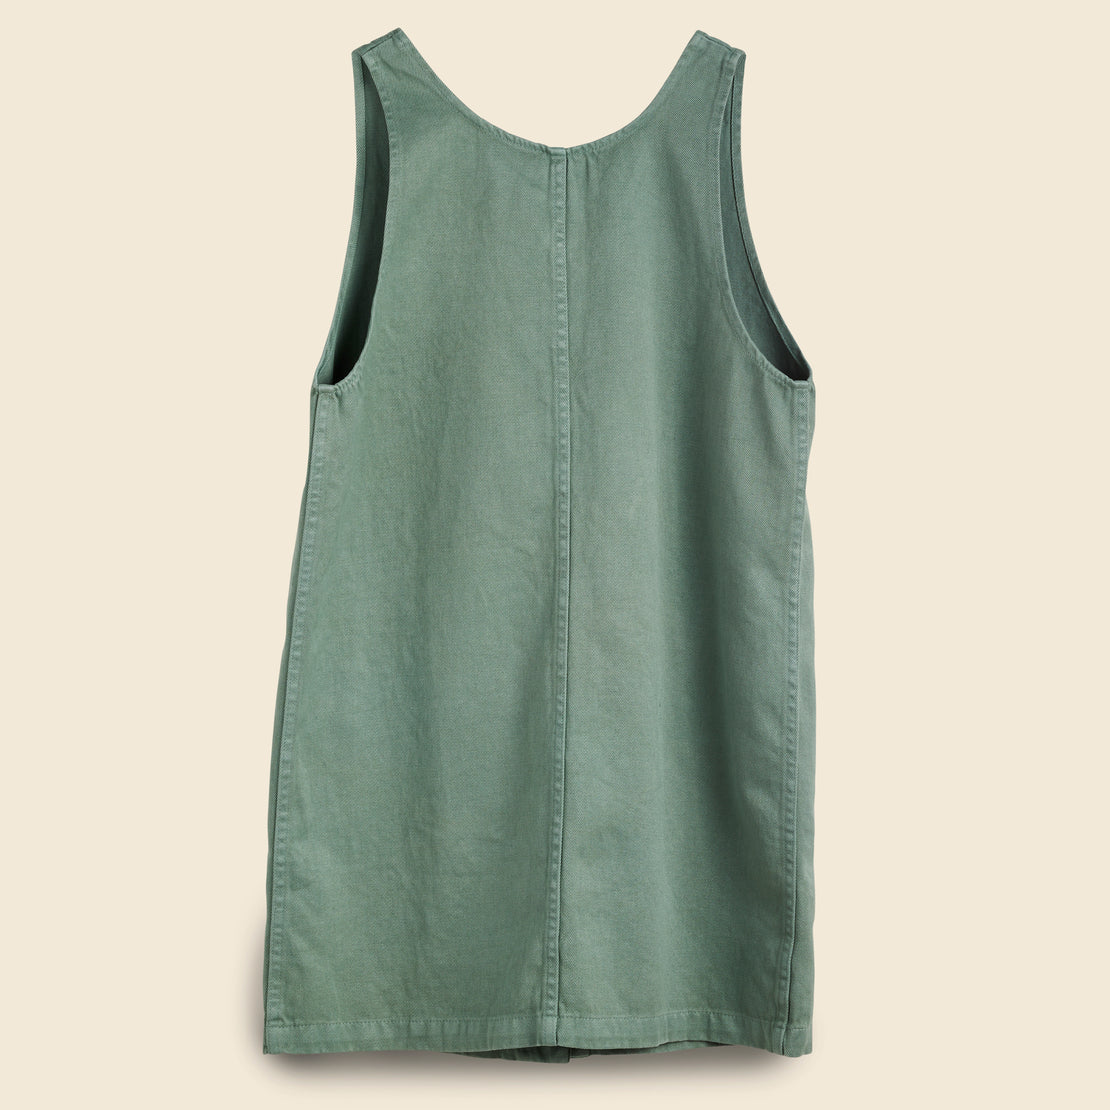 Jumper Dress - Clay Green - Jungmaven - STAG Provisions - W - Onepiece - Dress